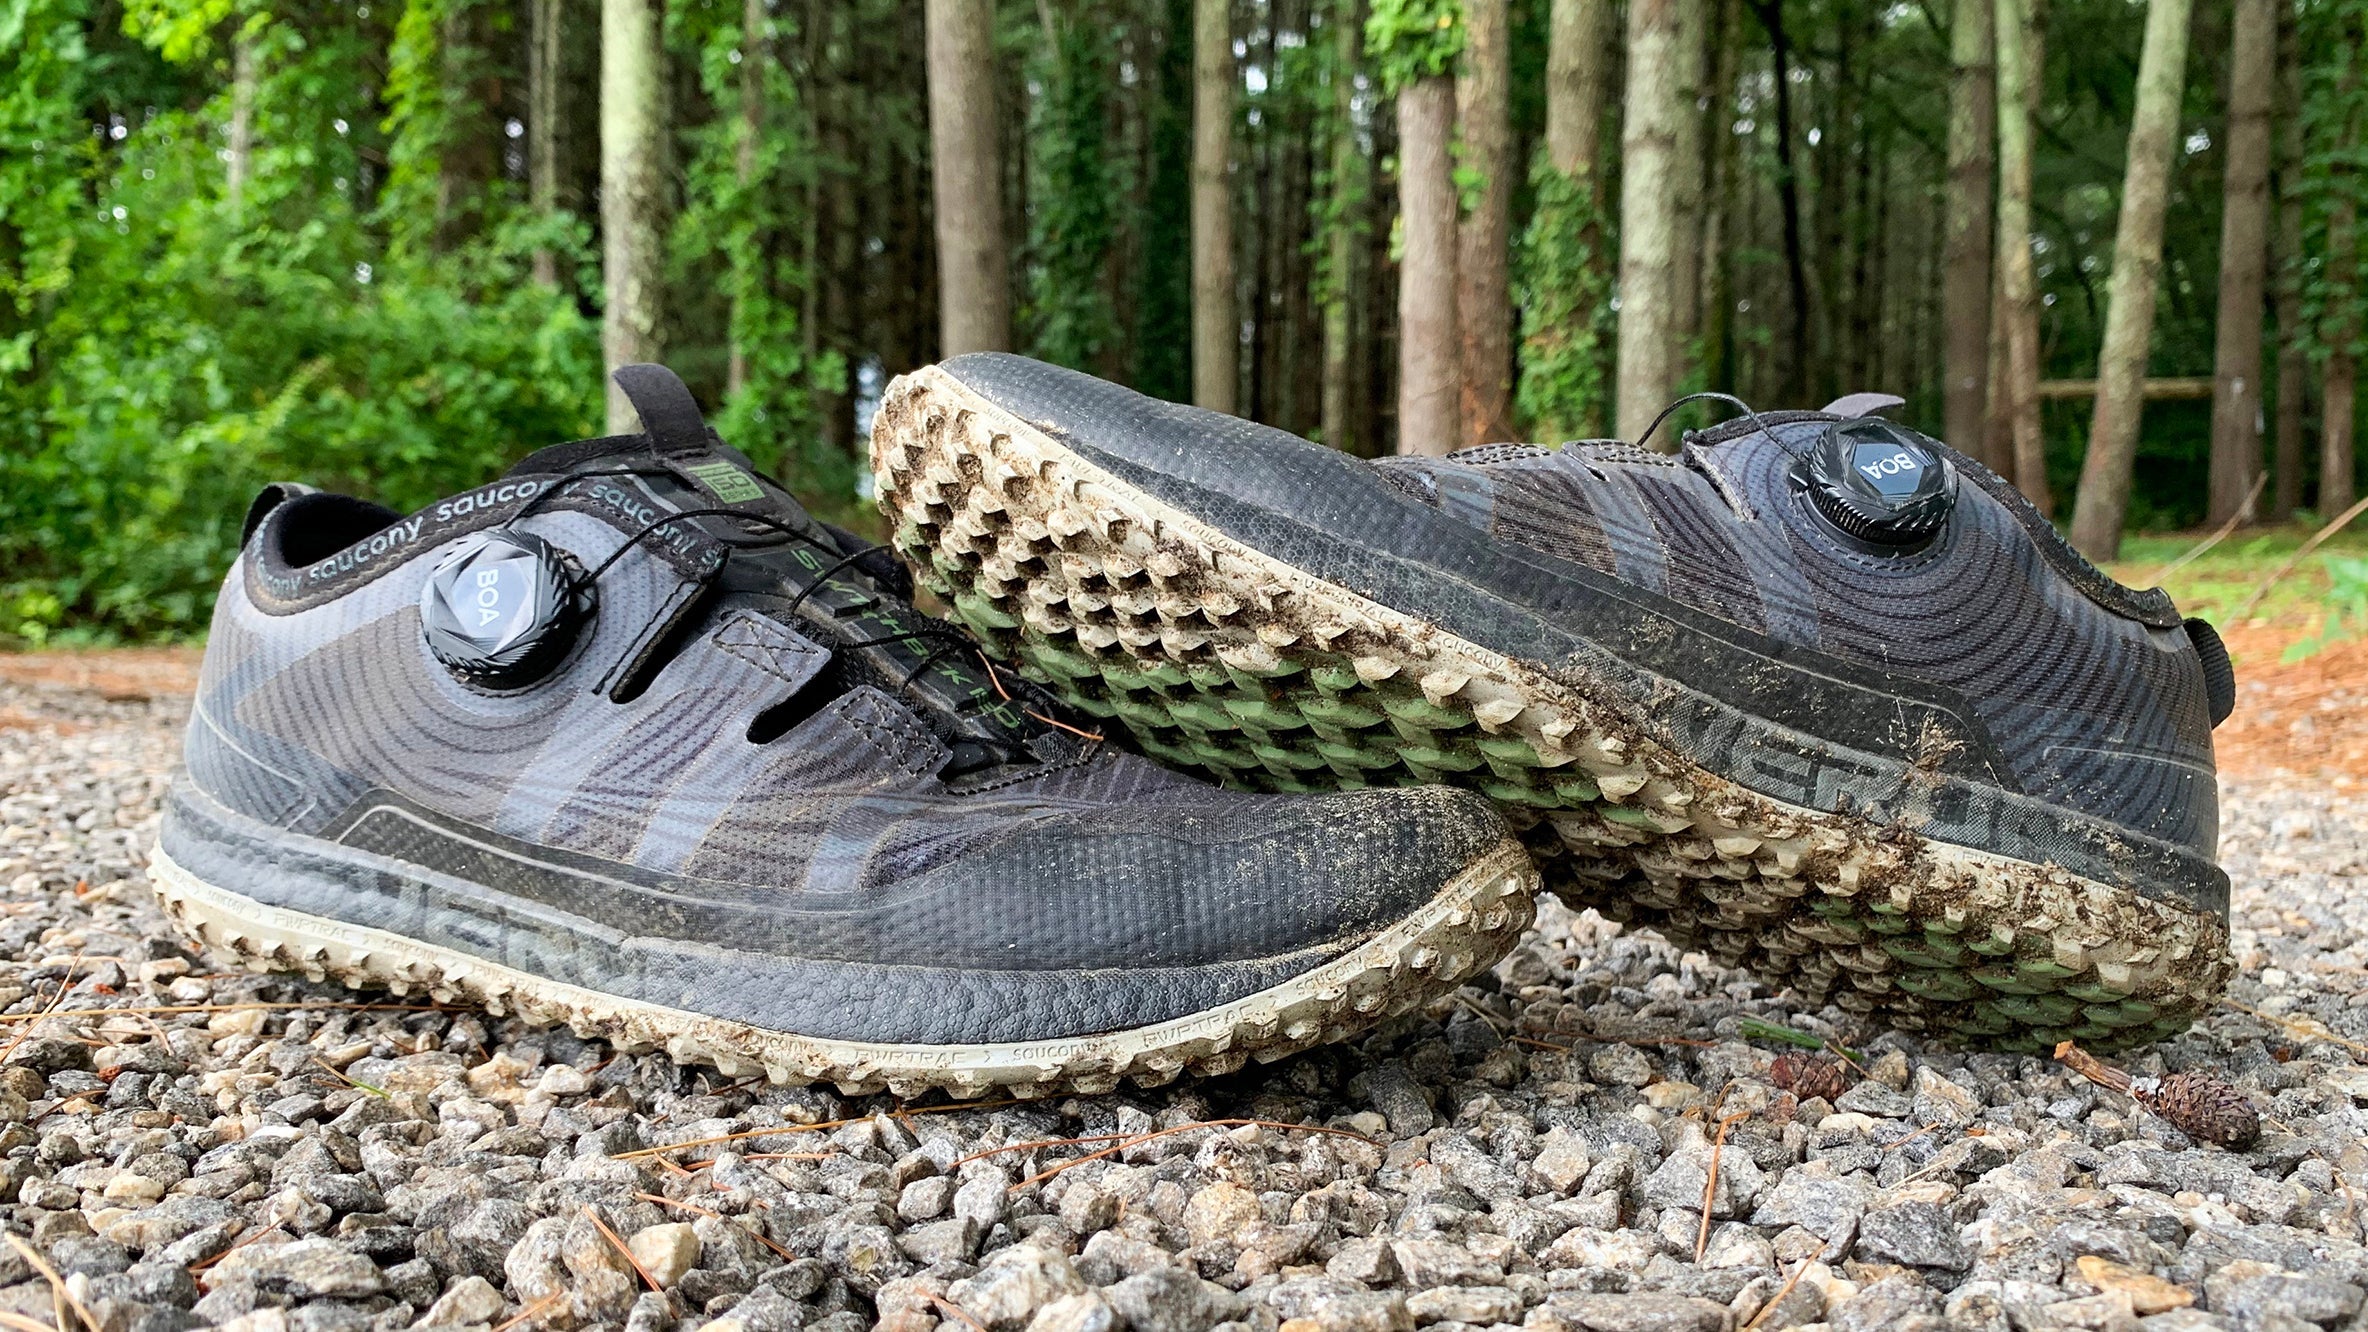 Do Saucony Switchback Iso Loosen Up Over Time?